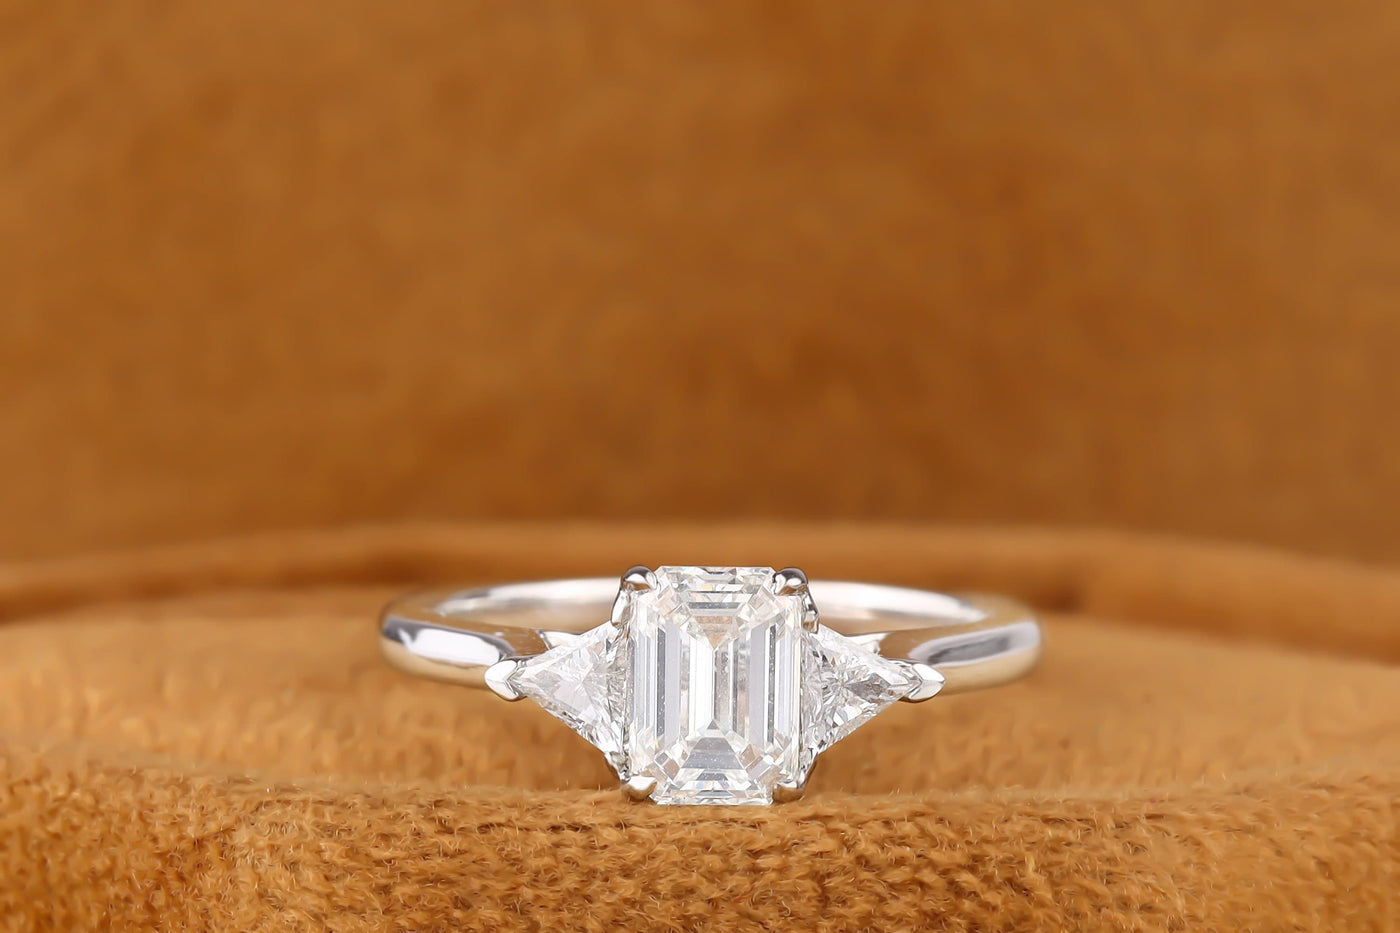 1 Ct Emerald Cut Colorless Moissanite Engagement Ring, Solid White Gold Ring, Three Stone Solitaire Wedding Ring, Triangle Moissanite Ring